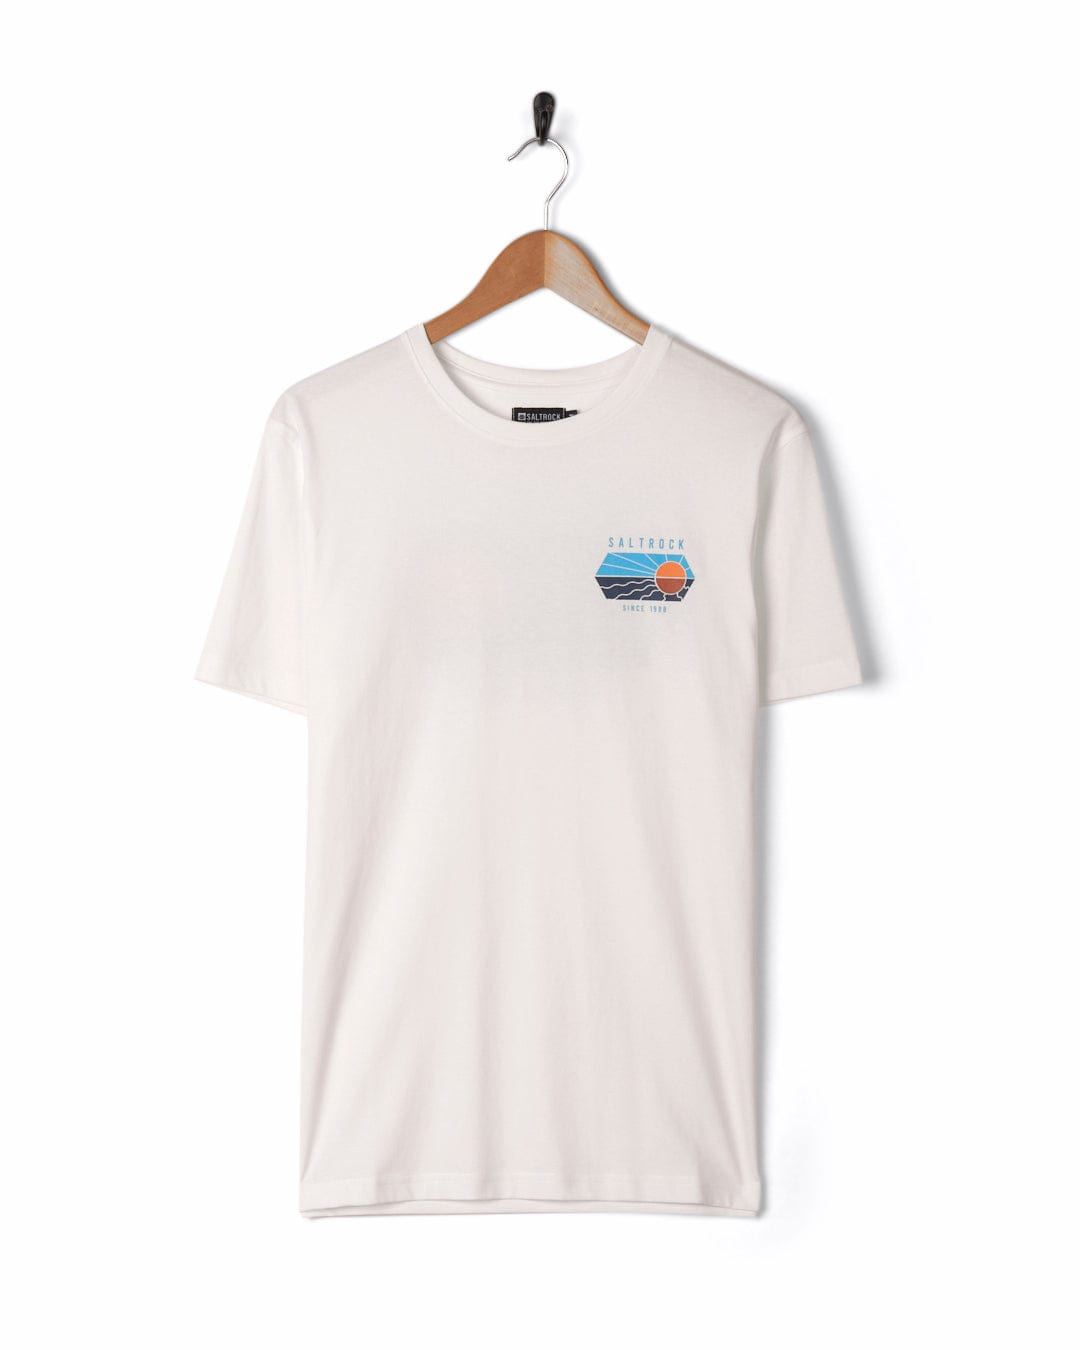 A Saltrock Vantage Colour - Mens Short Sleeve T-Shirt in White with an image of a mountain on it.